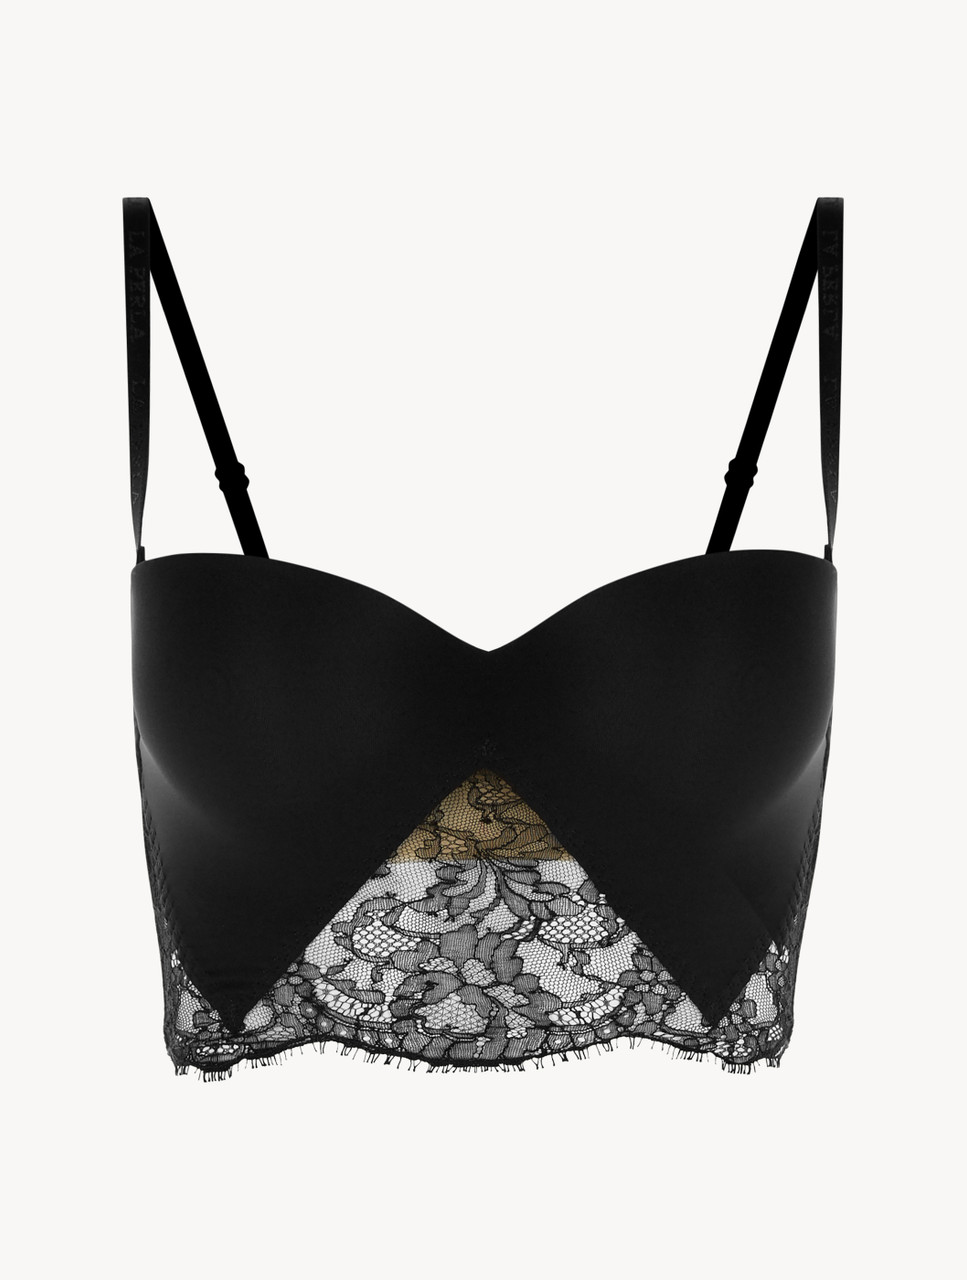 Buy Basic Non Wire Strapless Padded Half Cup Bra - Black Online